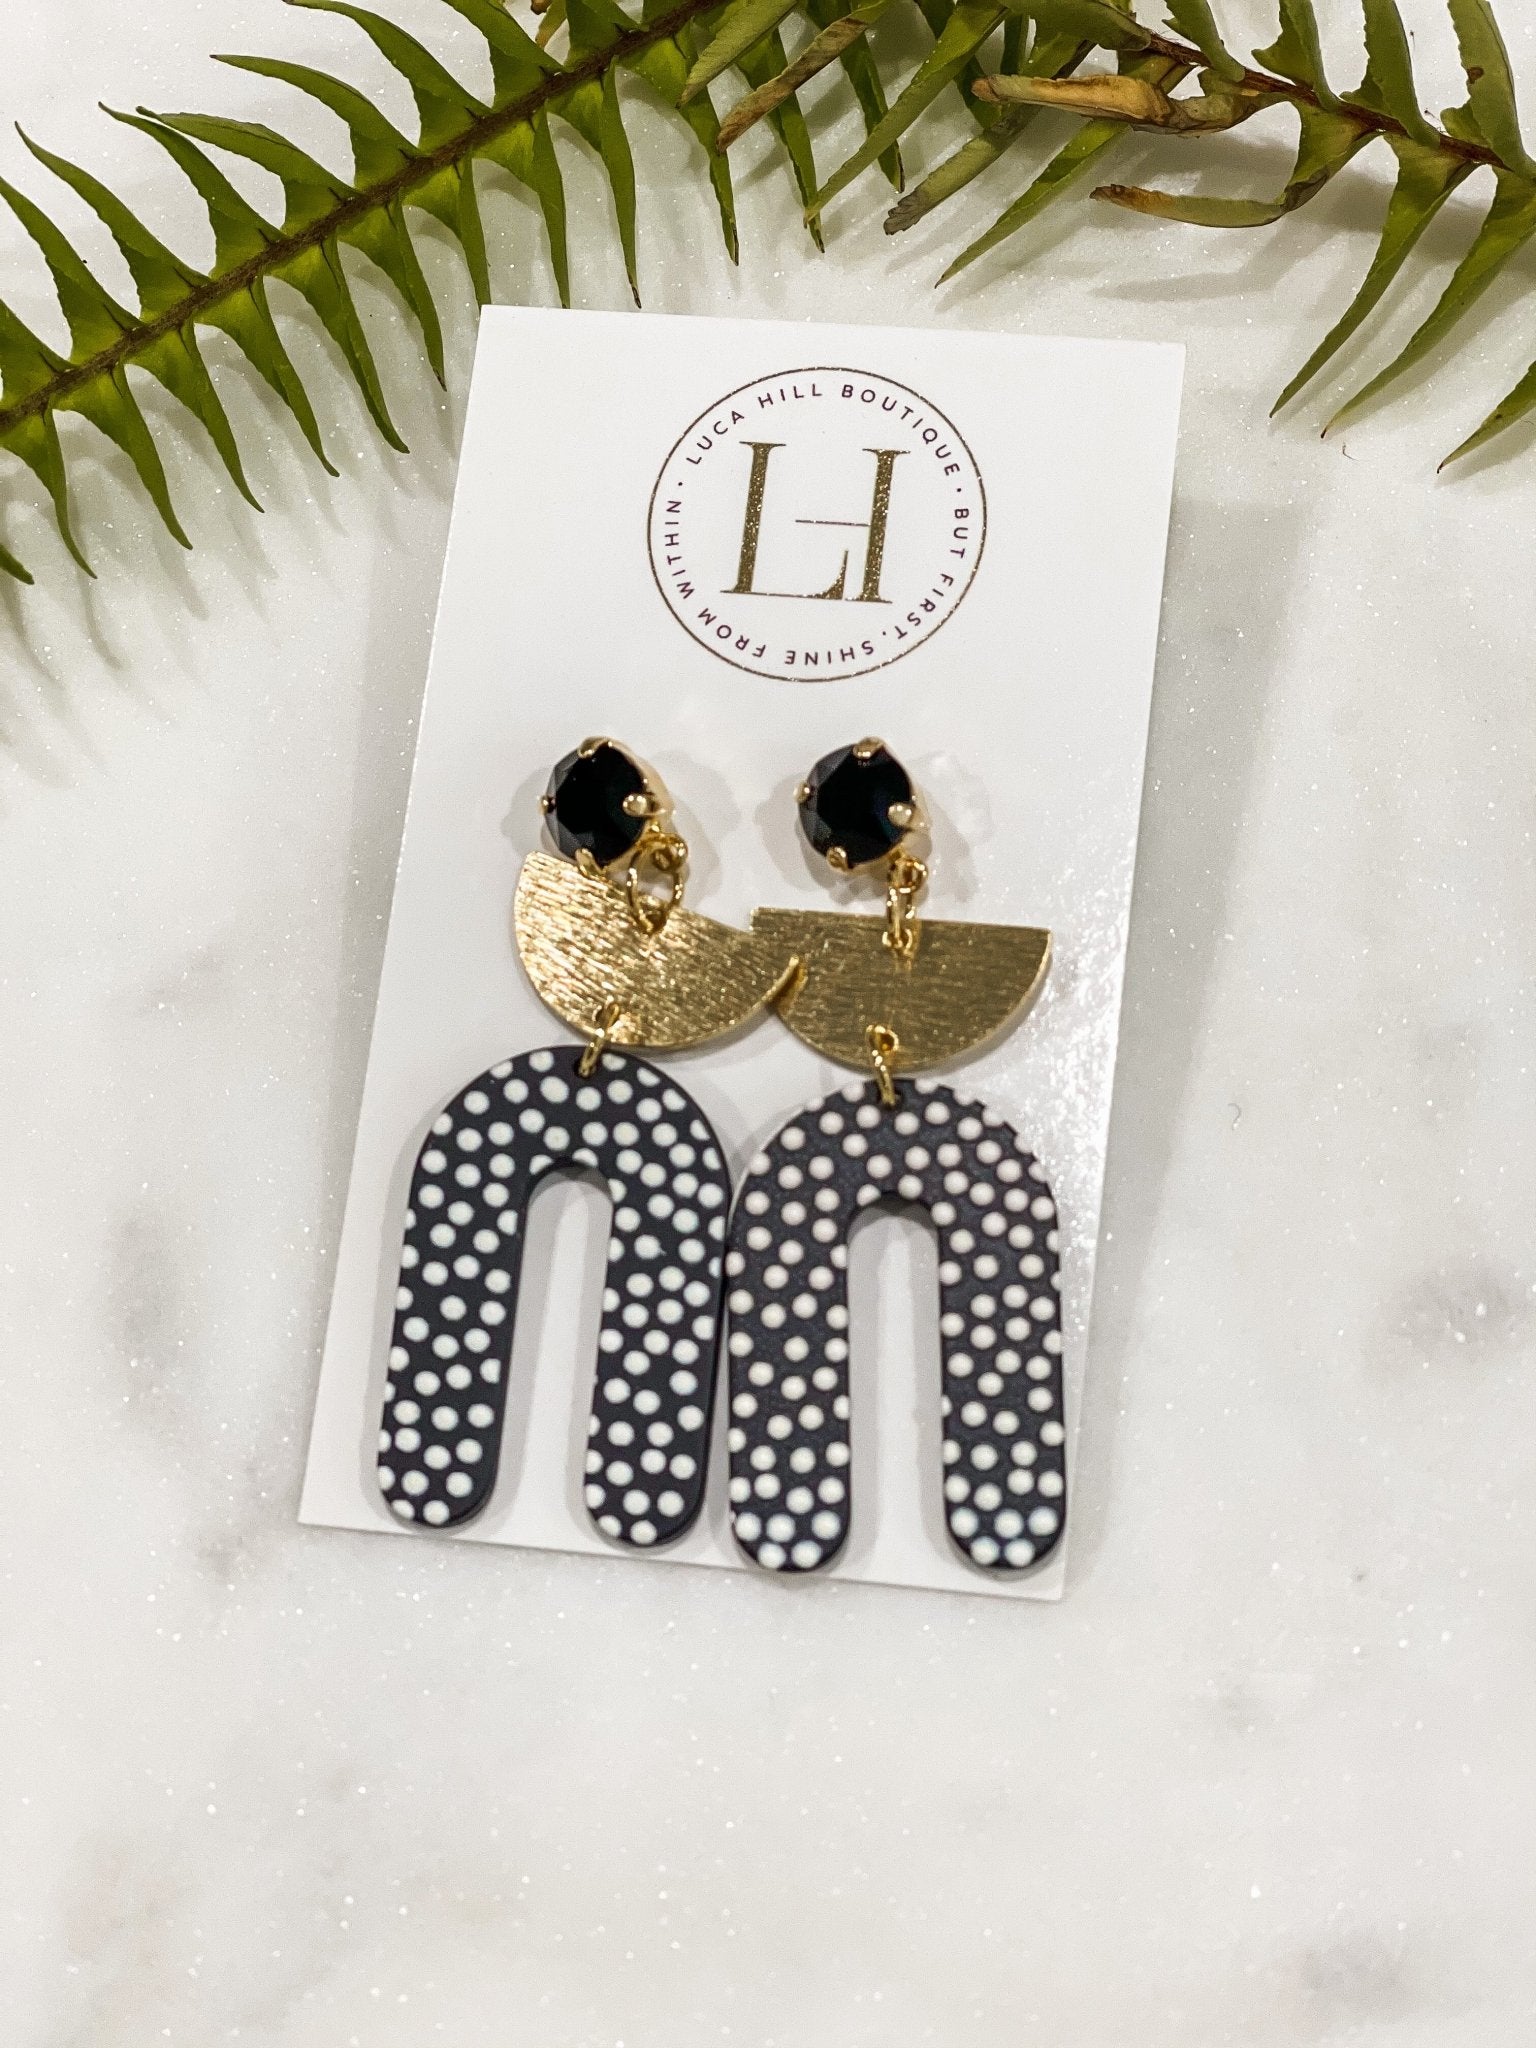 “Dots and Arches” Earrings - Luca Hill BoutiqueEarrings